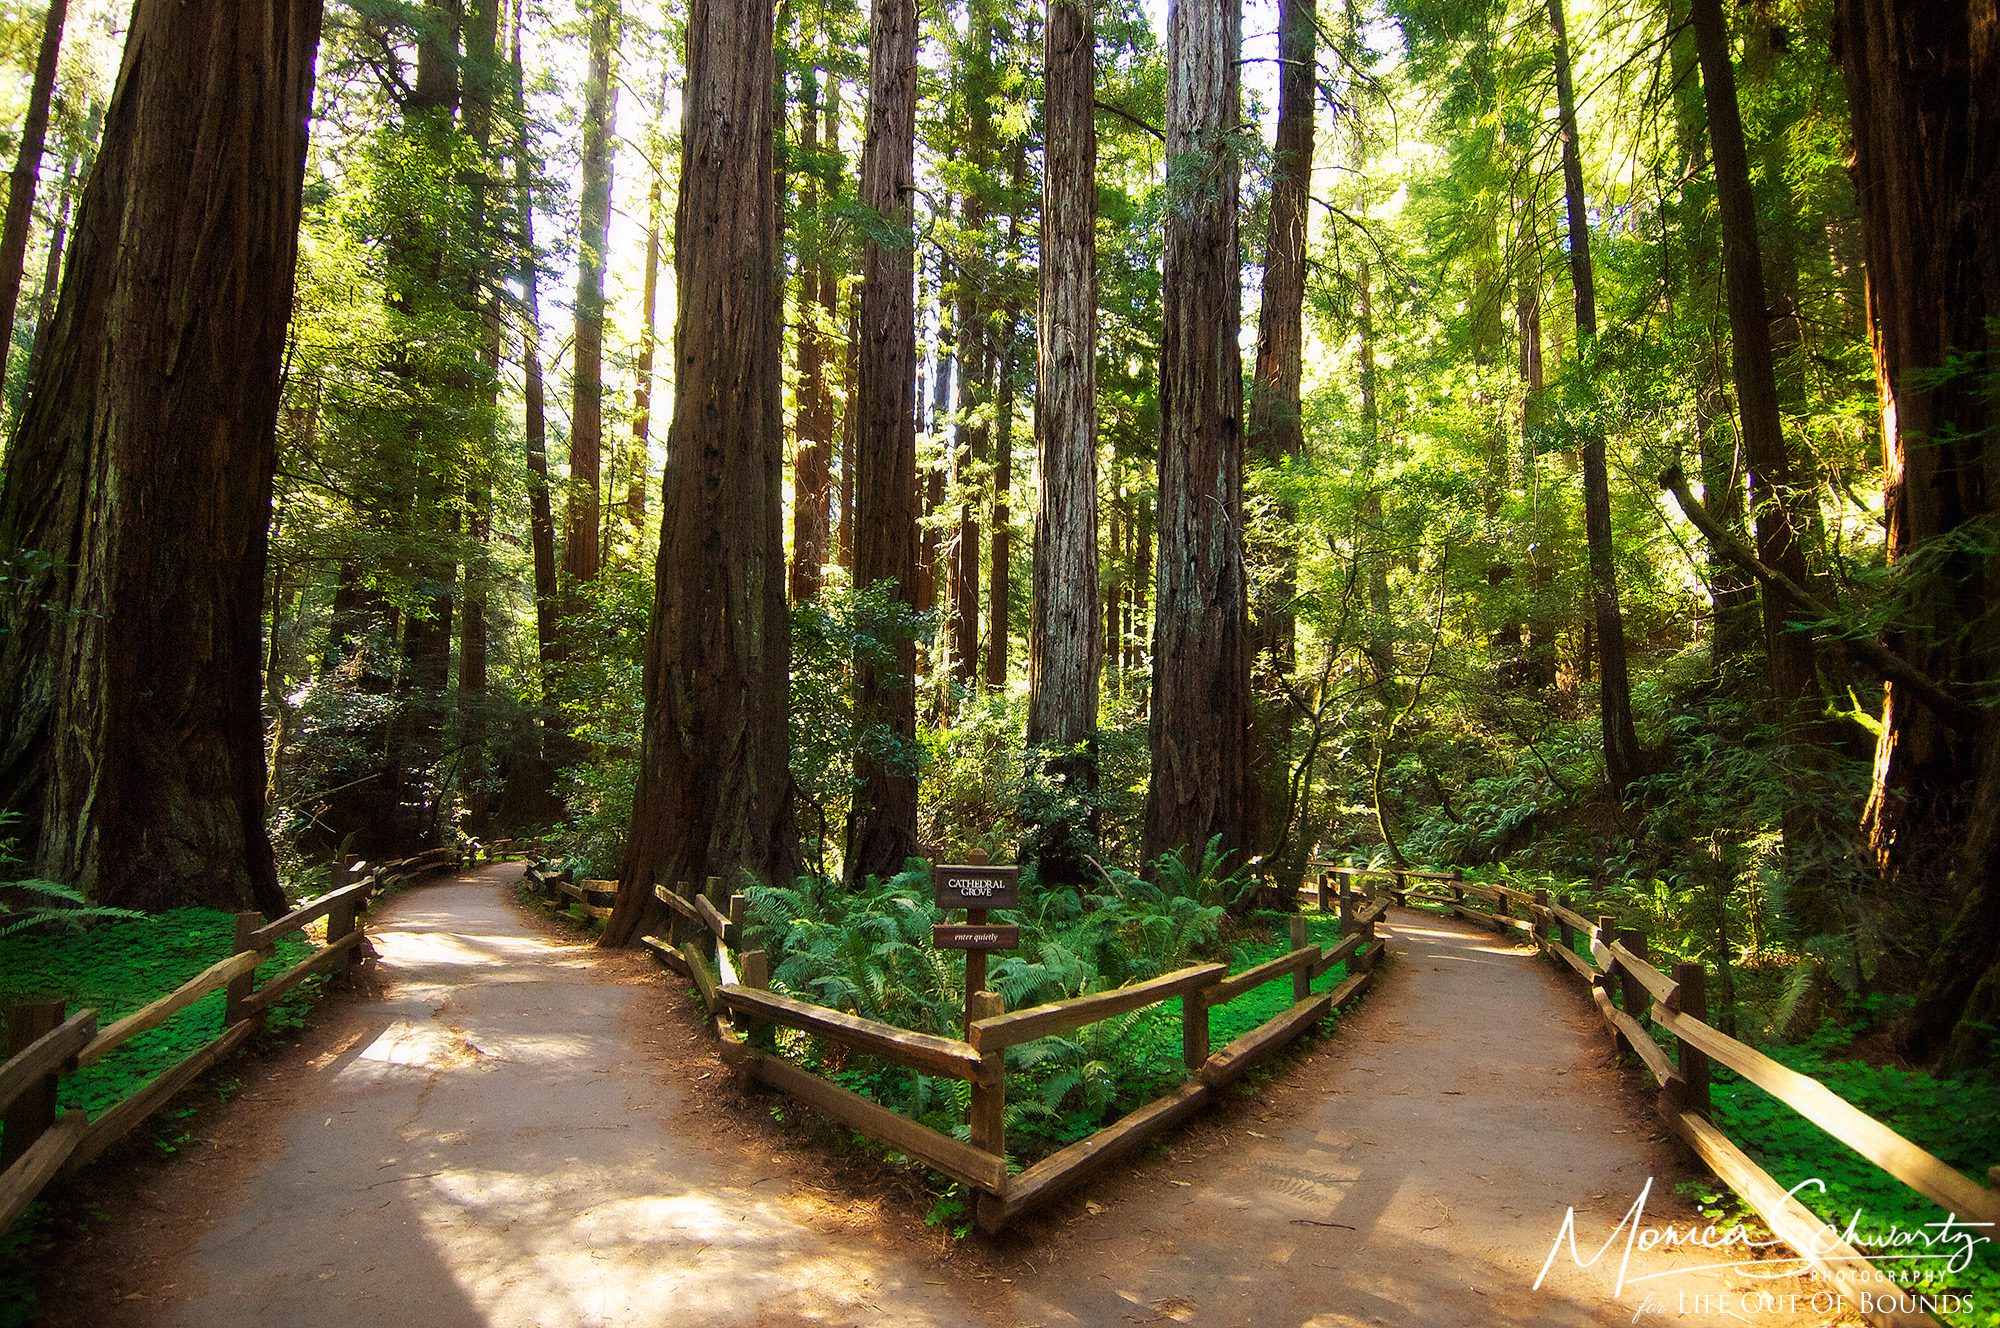 Muir-Woods-National-Monument-Redwood-Forest-Mill-Valley-California